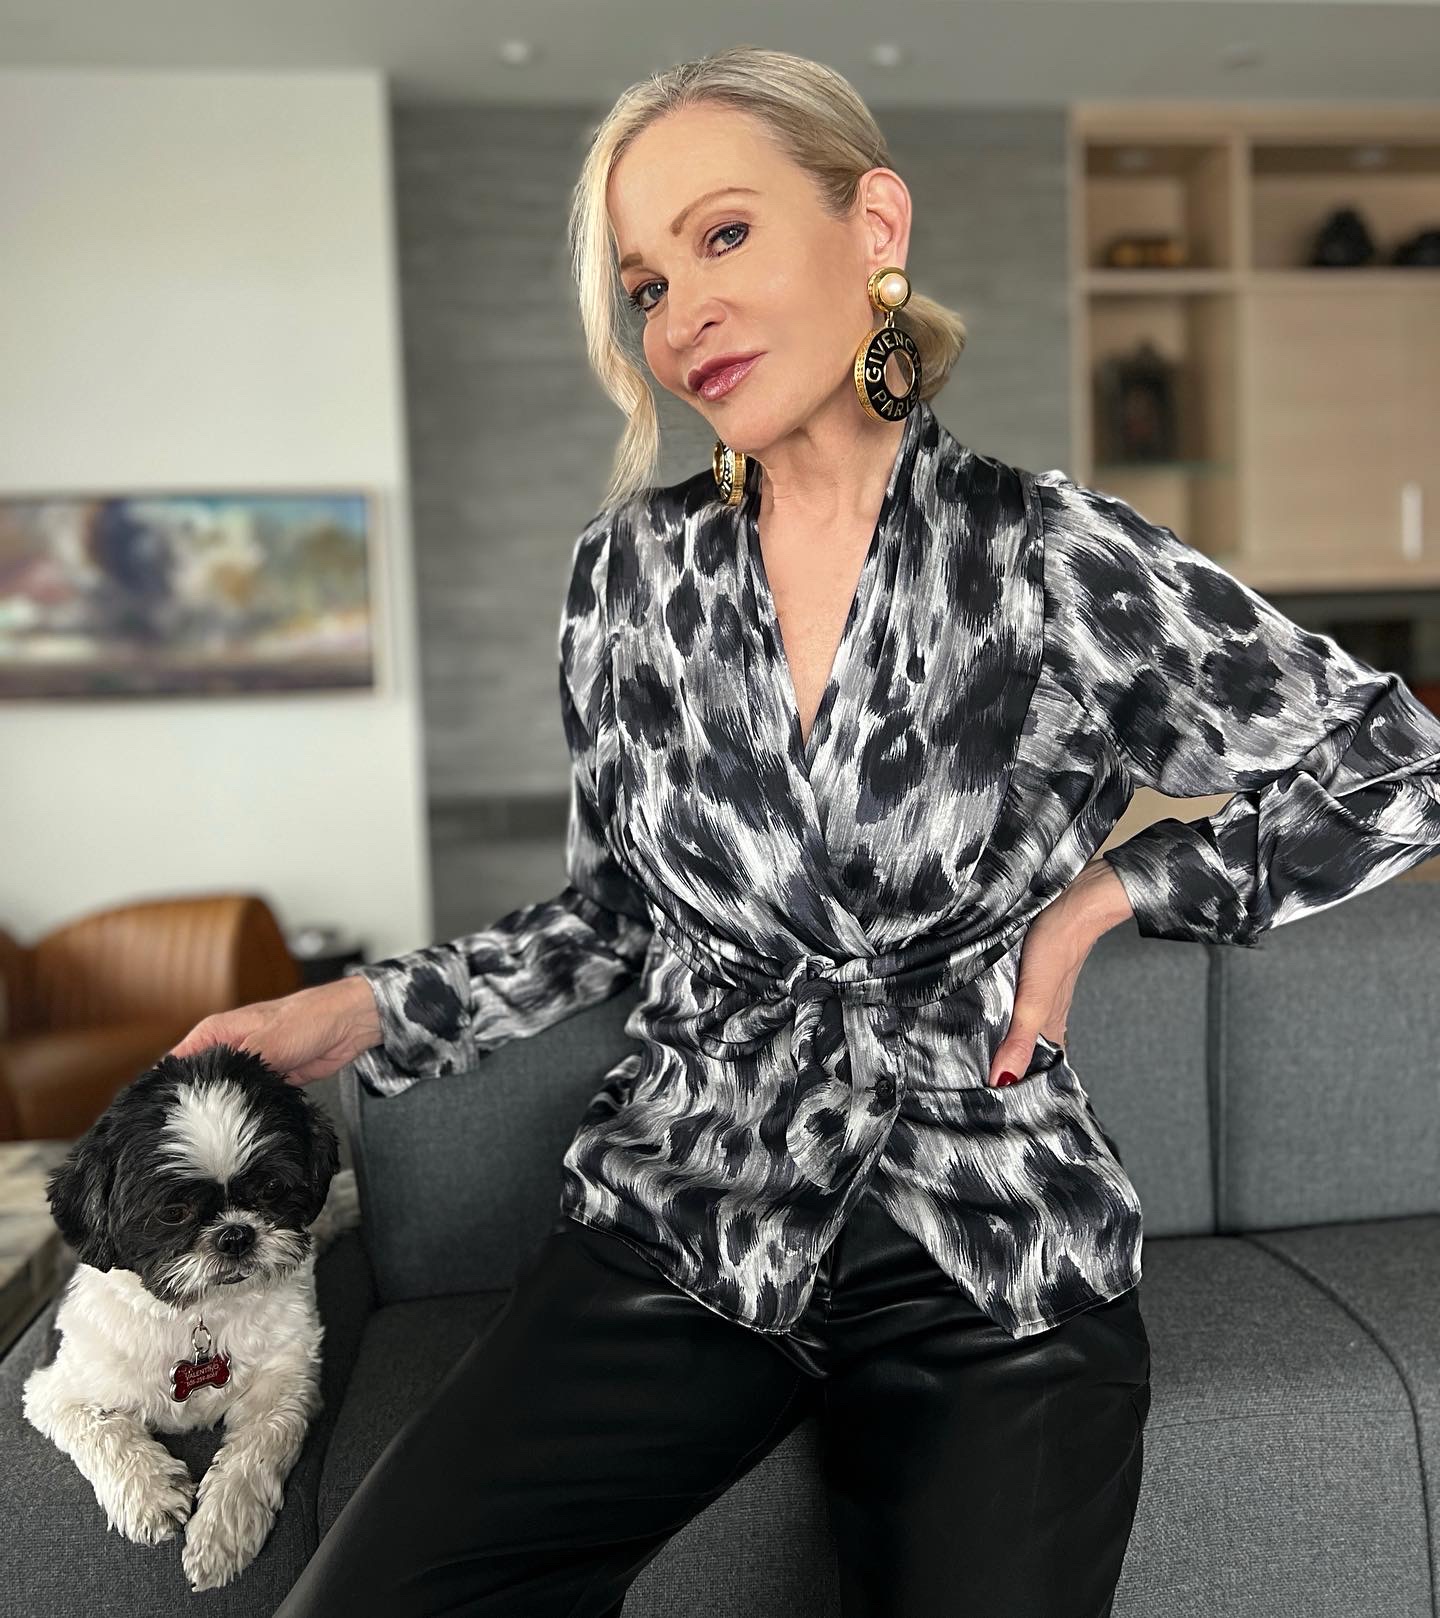 Lifestyle Influencer, Jamie Lewinger of More Than Turquoise, wearing the leopard blouse from Farinaz